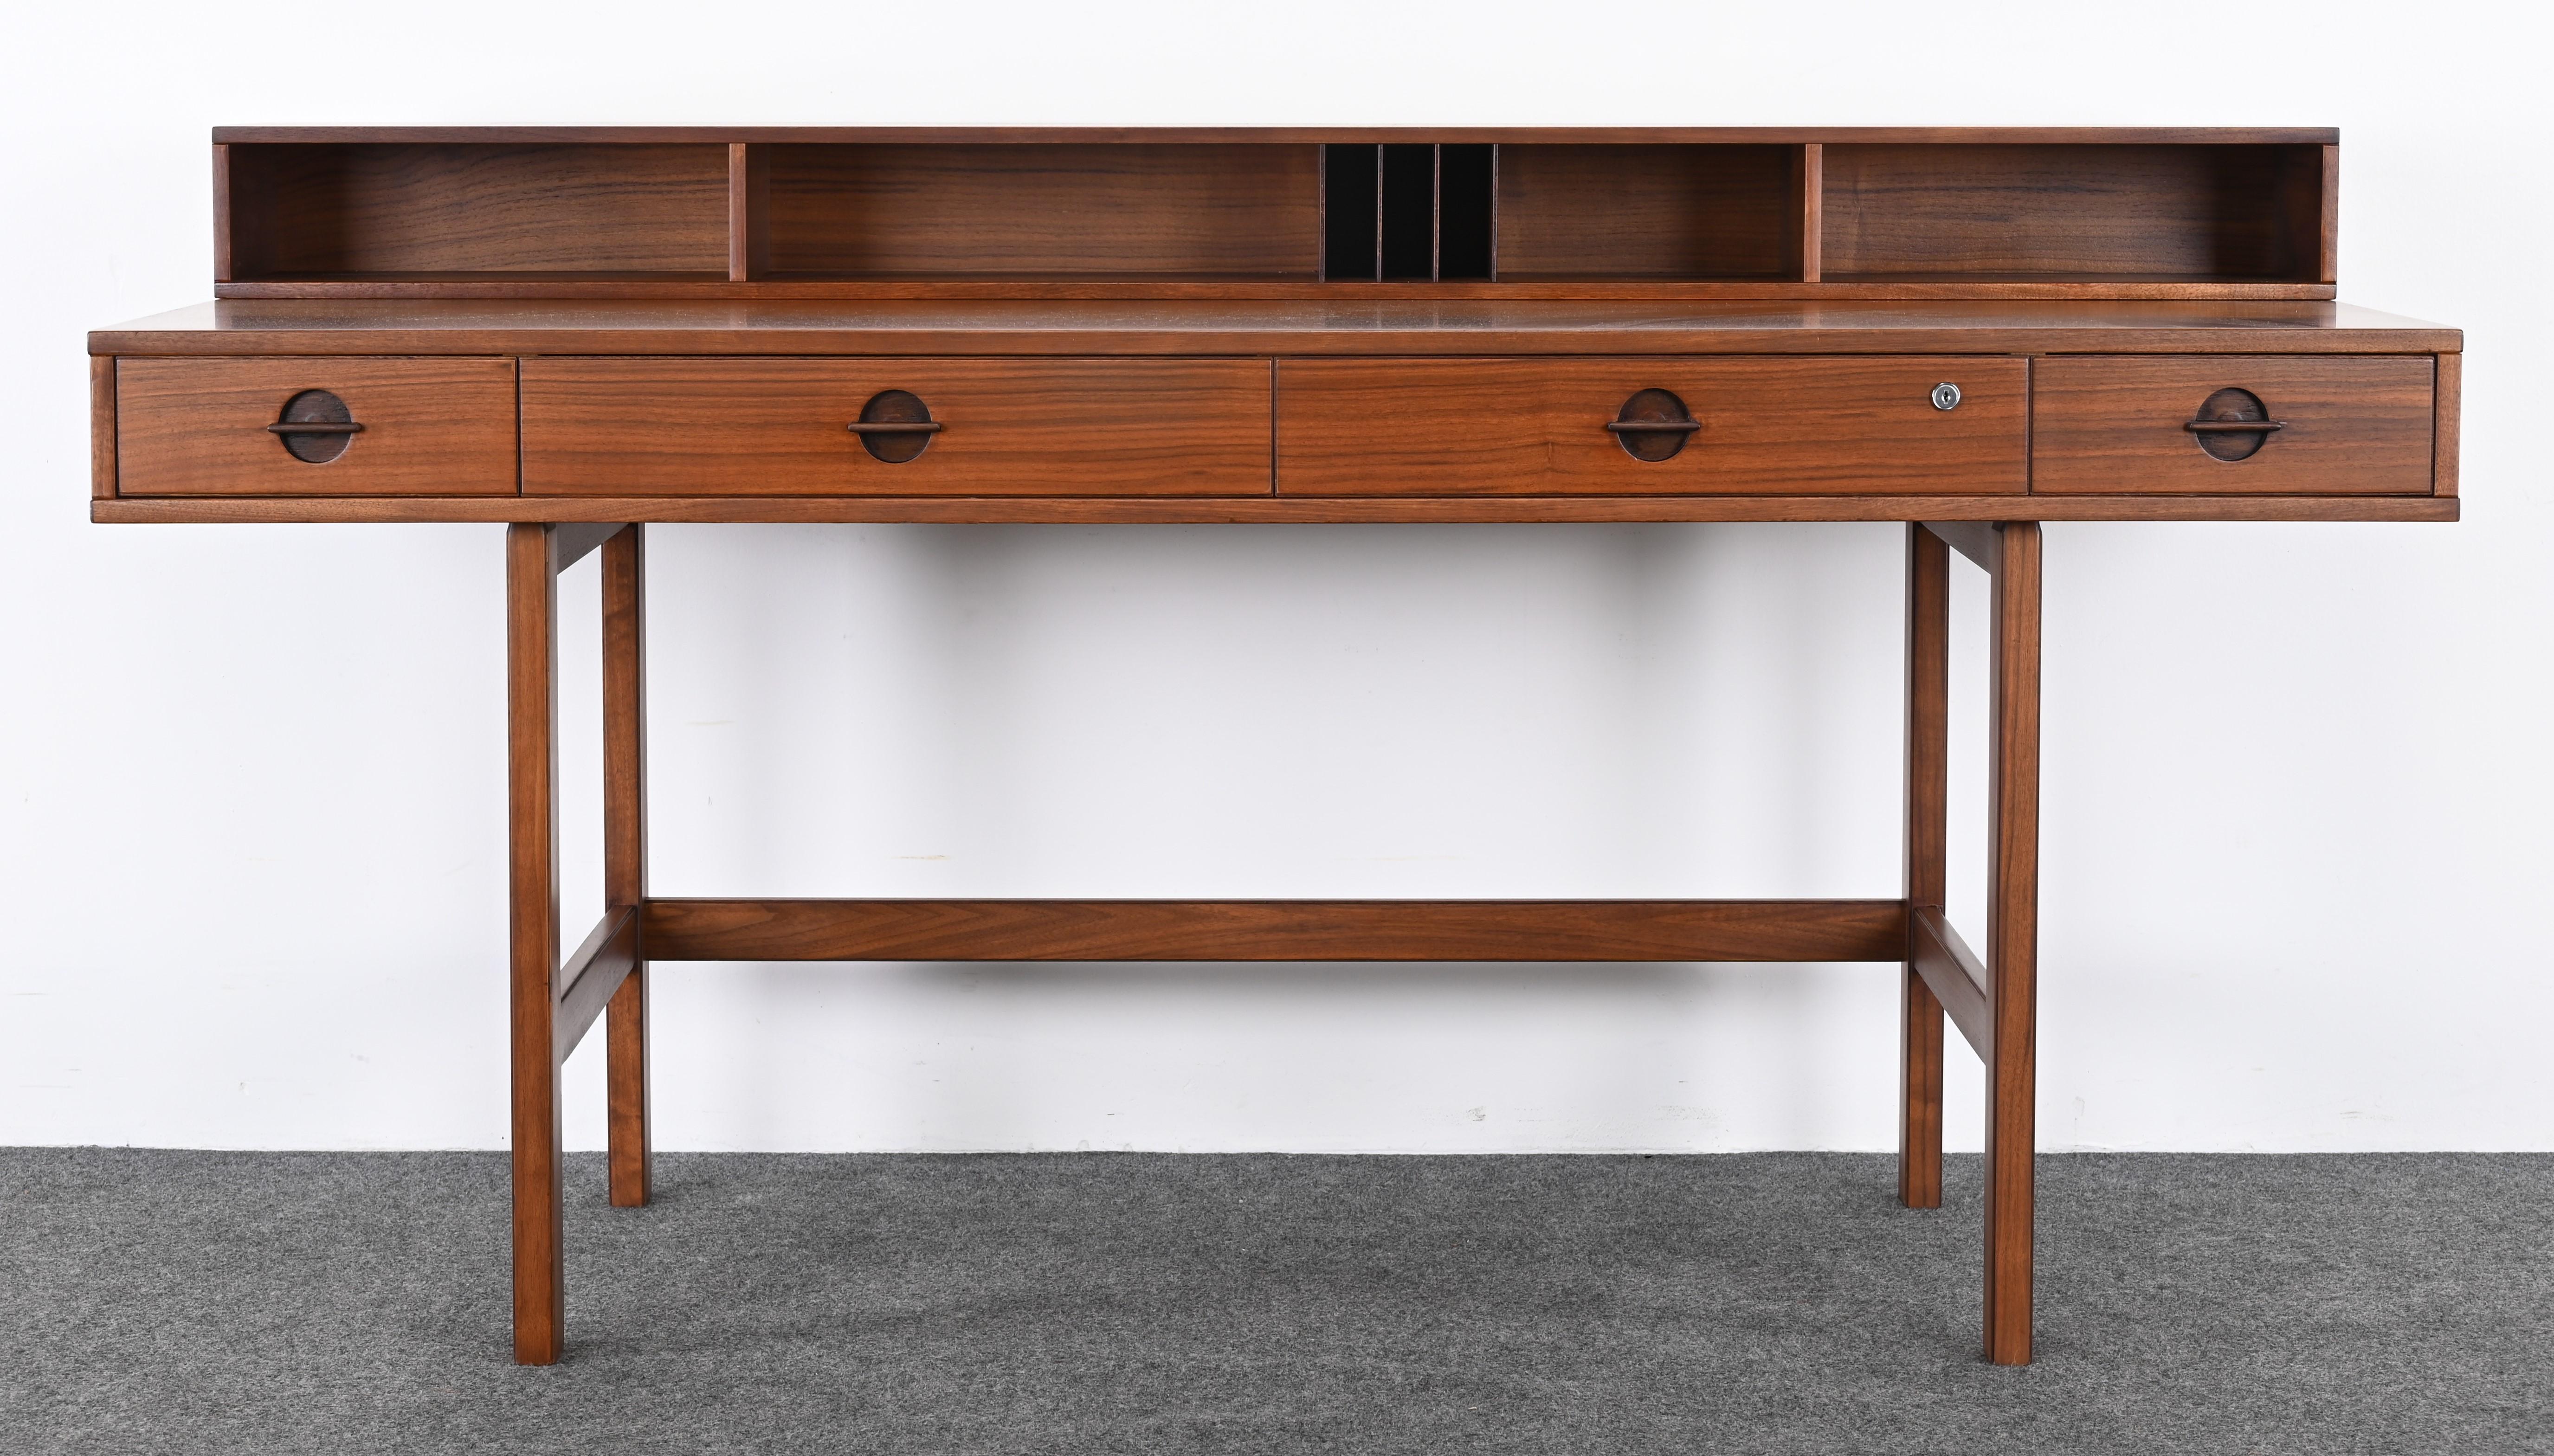 A beautiful expandable Danish Modern walnut desk with a flip-top design by Jens Quistgaard for Peter Lovig Nielsen. This desk can be used either flipped down for expansive space or flipped up for ample storage. Solid walnut construction with a